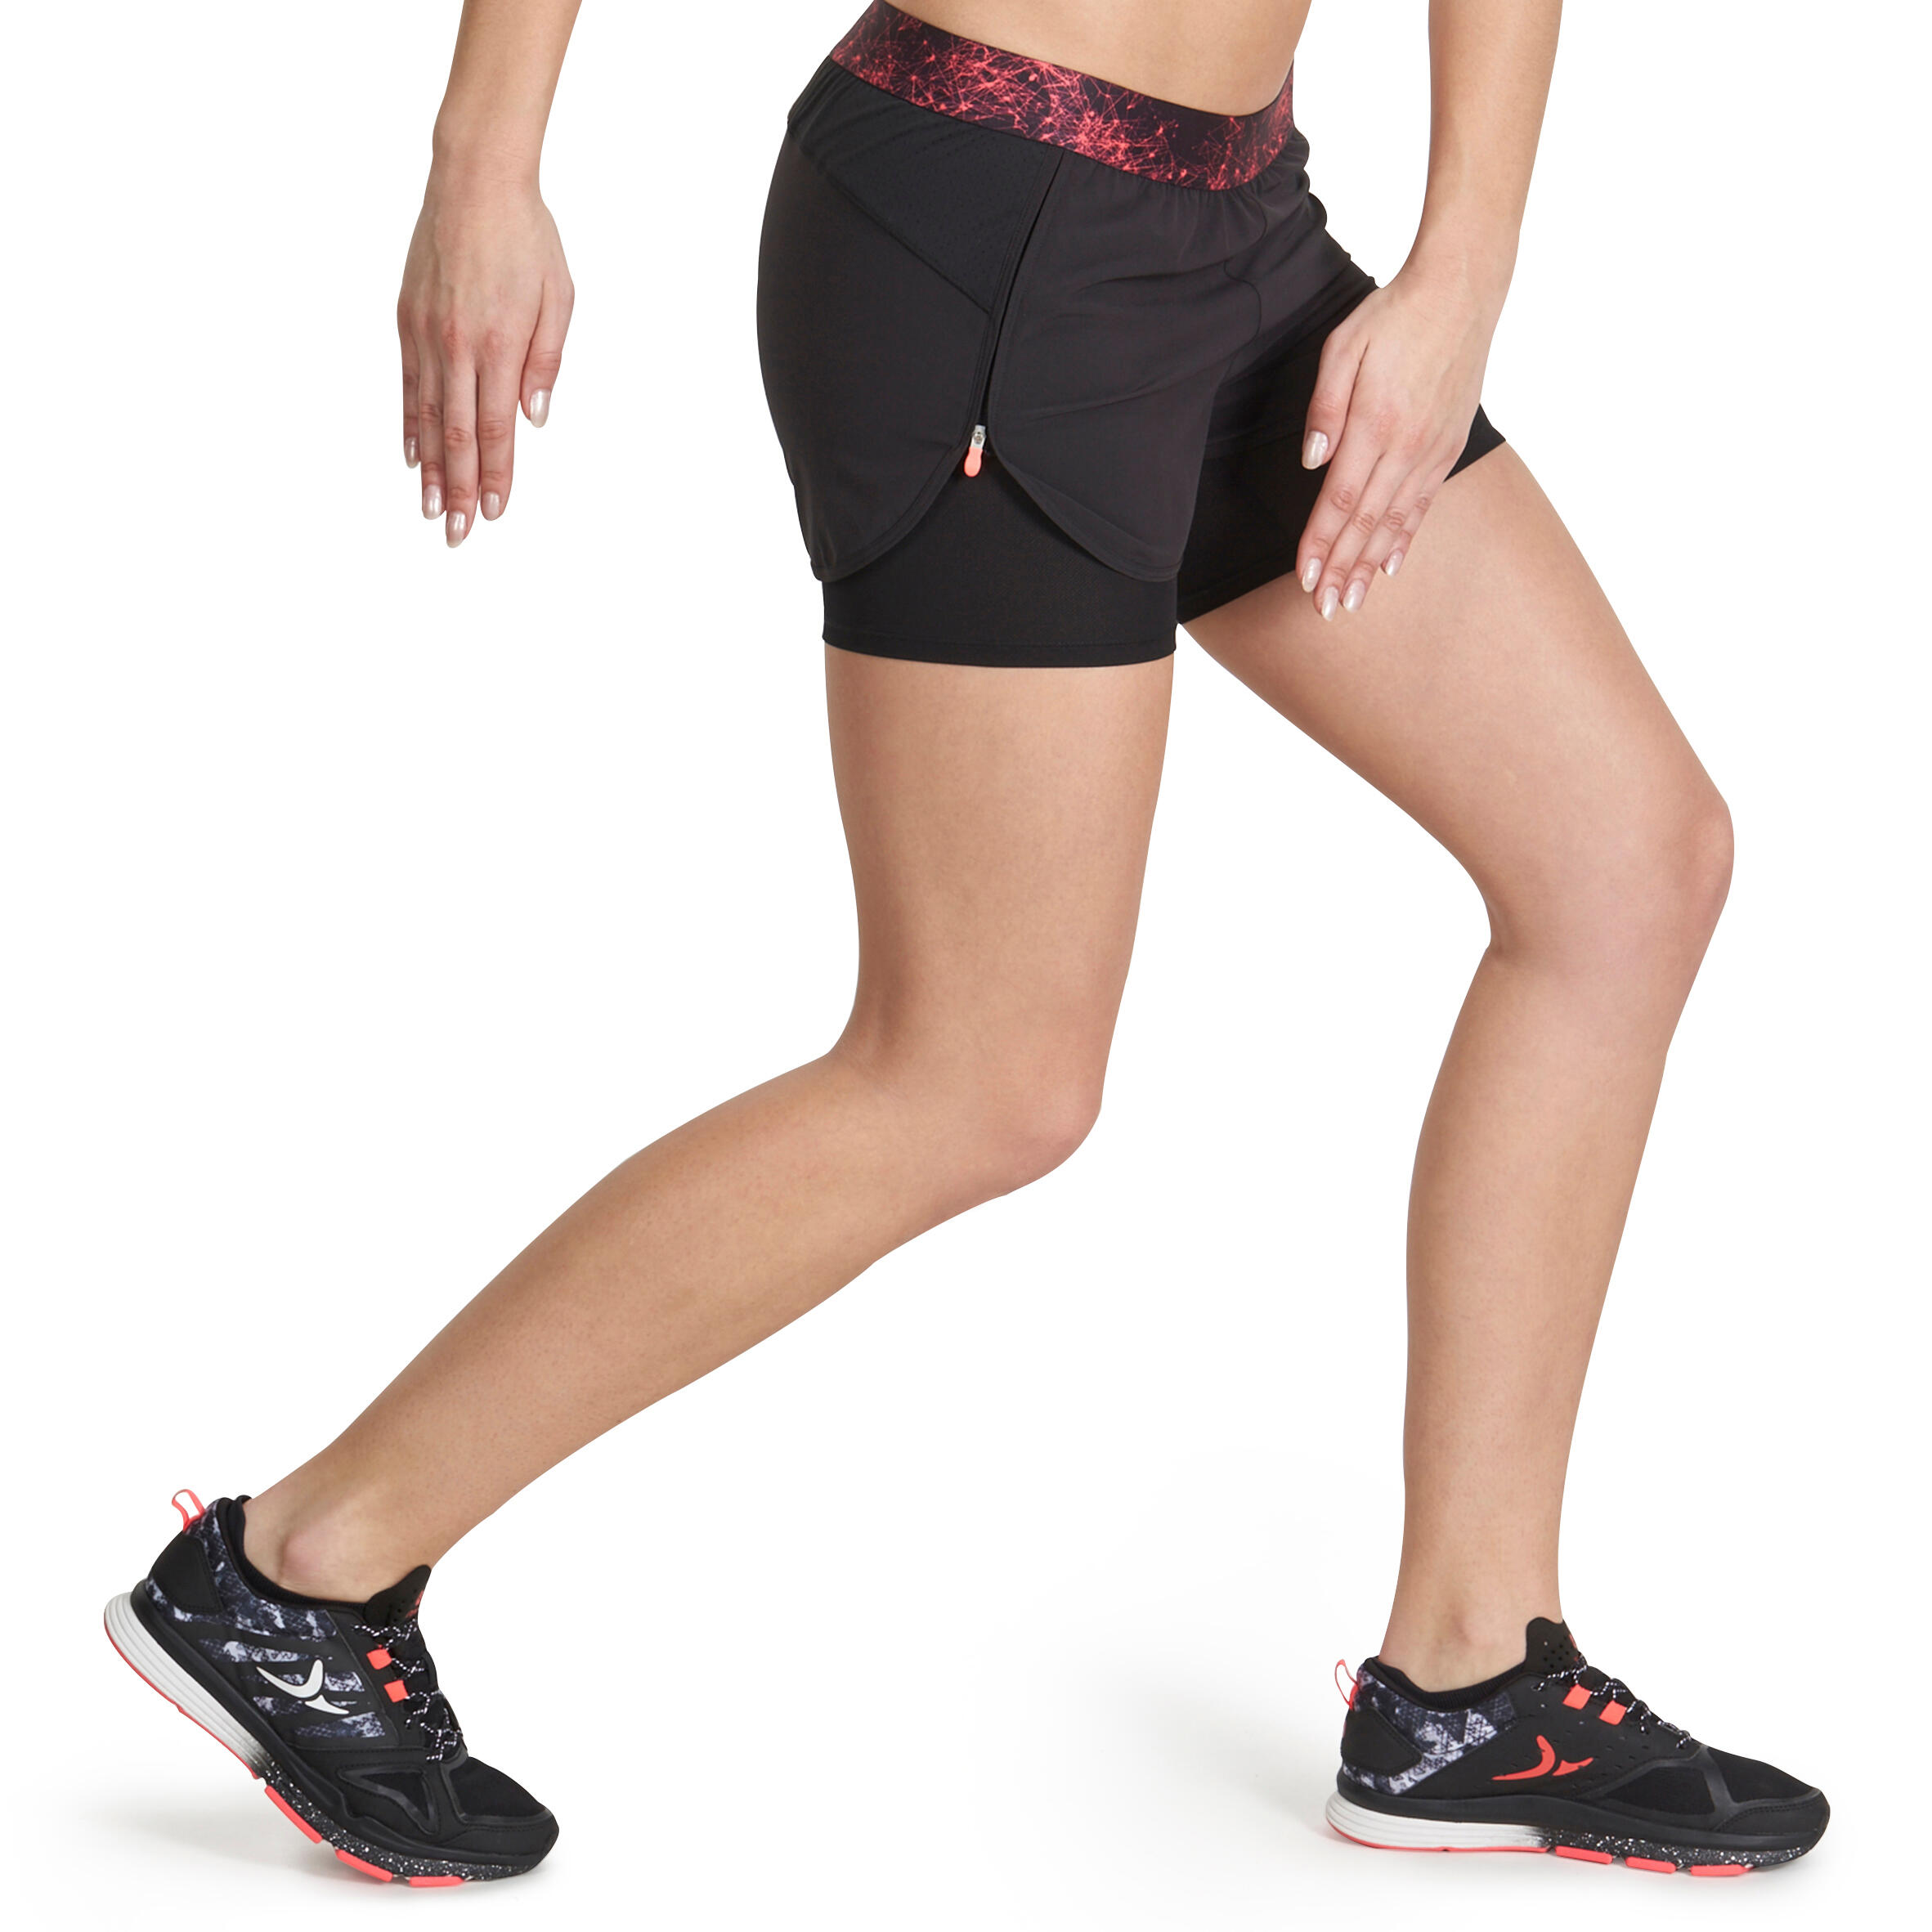 Energy Xtreme Women's 2-in-1 Fitness Shorts - Black/Printed Waistband 3/13